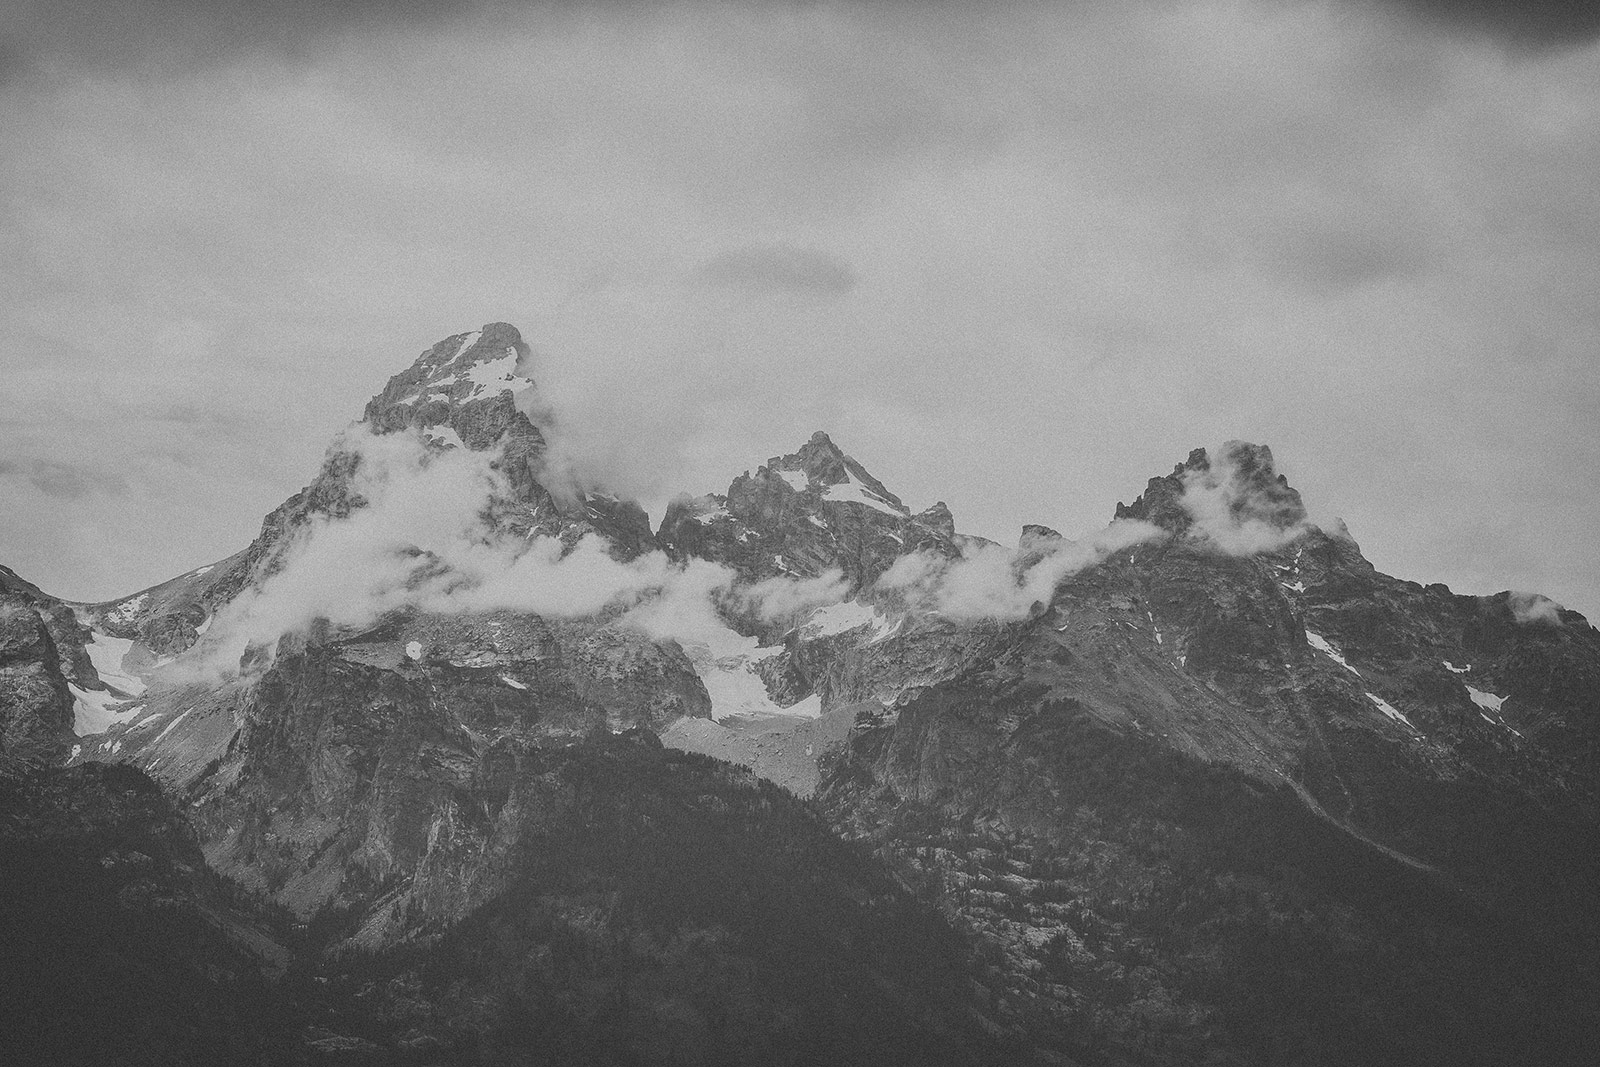 A black and white photo of some mountains